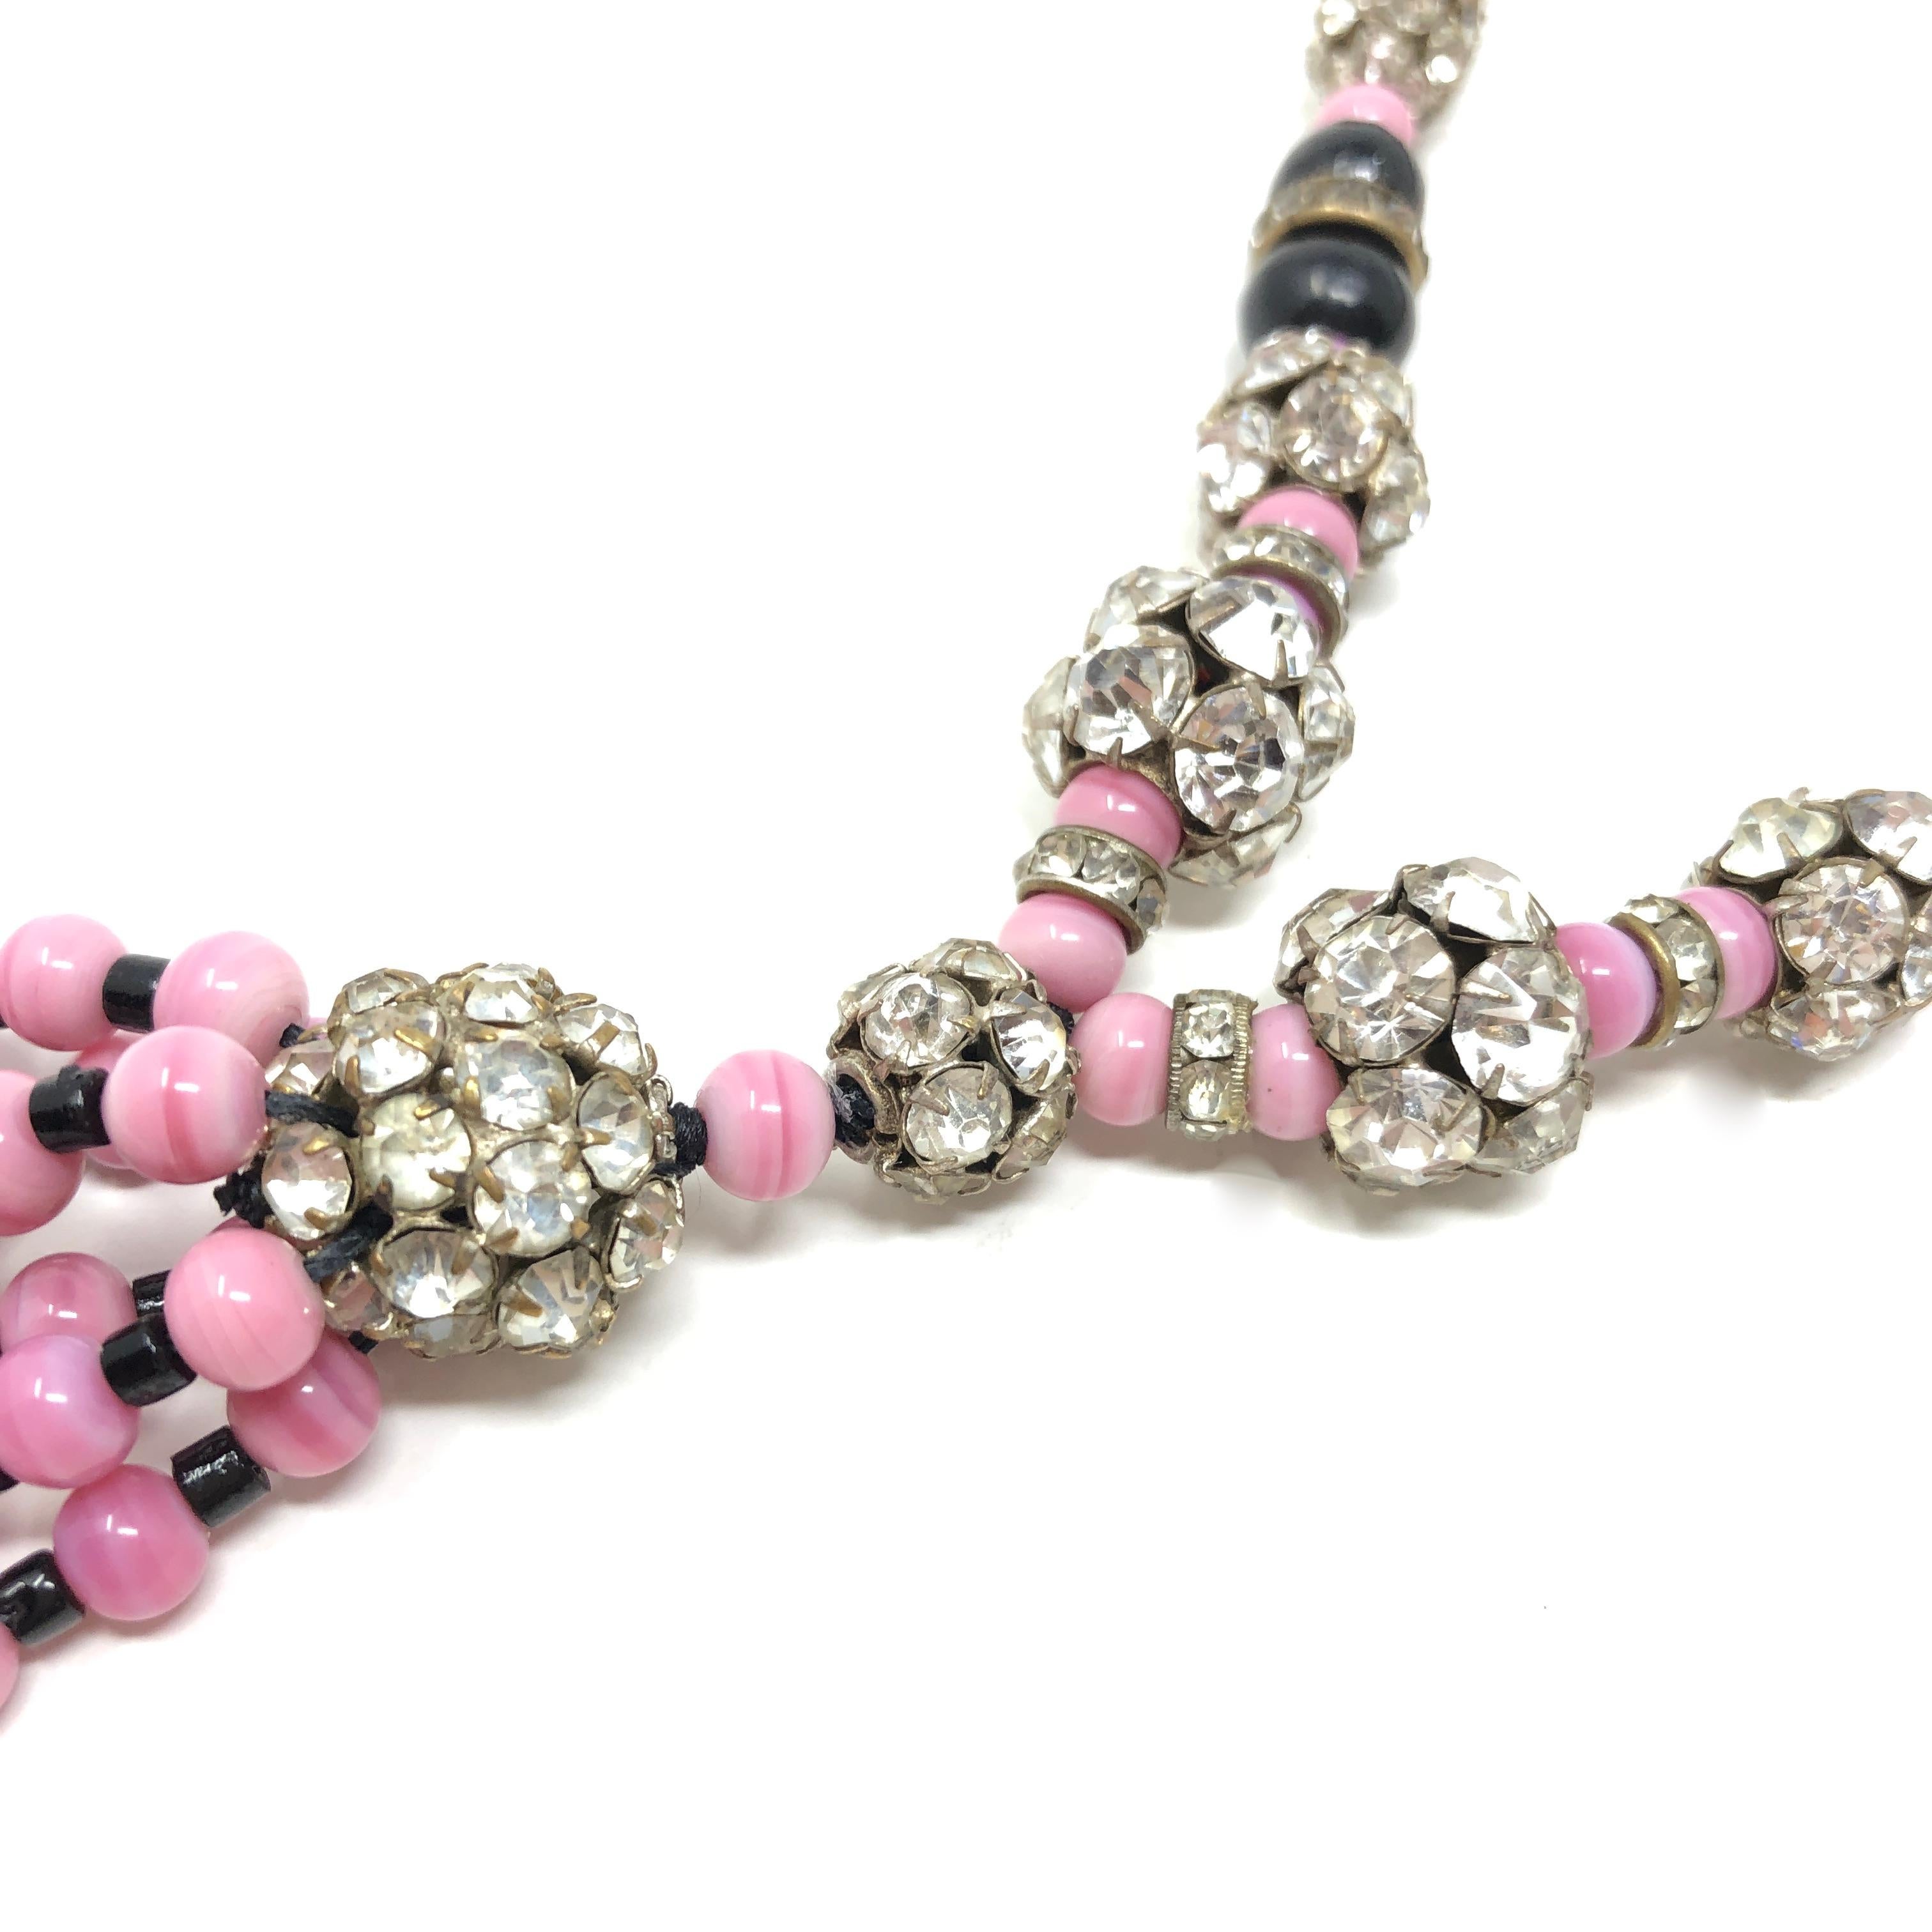 1920s Art Deco Pink and Black Glass Bead Rhinestone Vintage Flapper Necklace For Sale 2